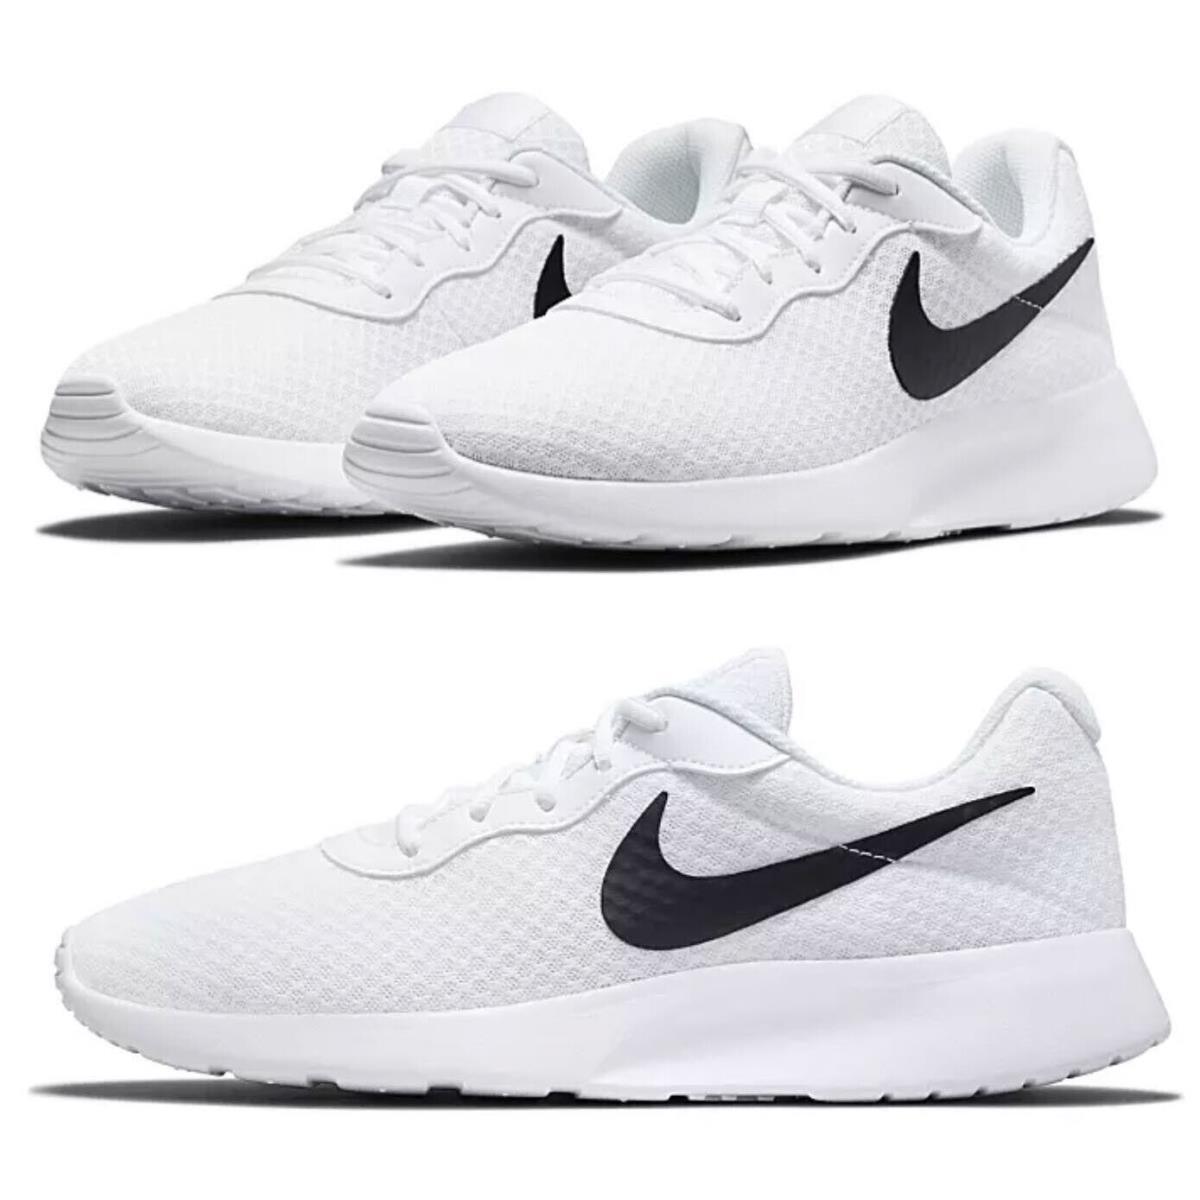 Nike Tanjun Athletic Sneakers Casual Shoes Work Mens White Black All Sizes